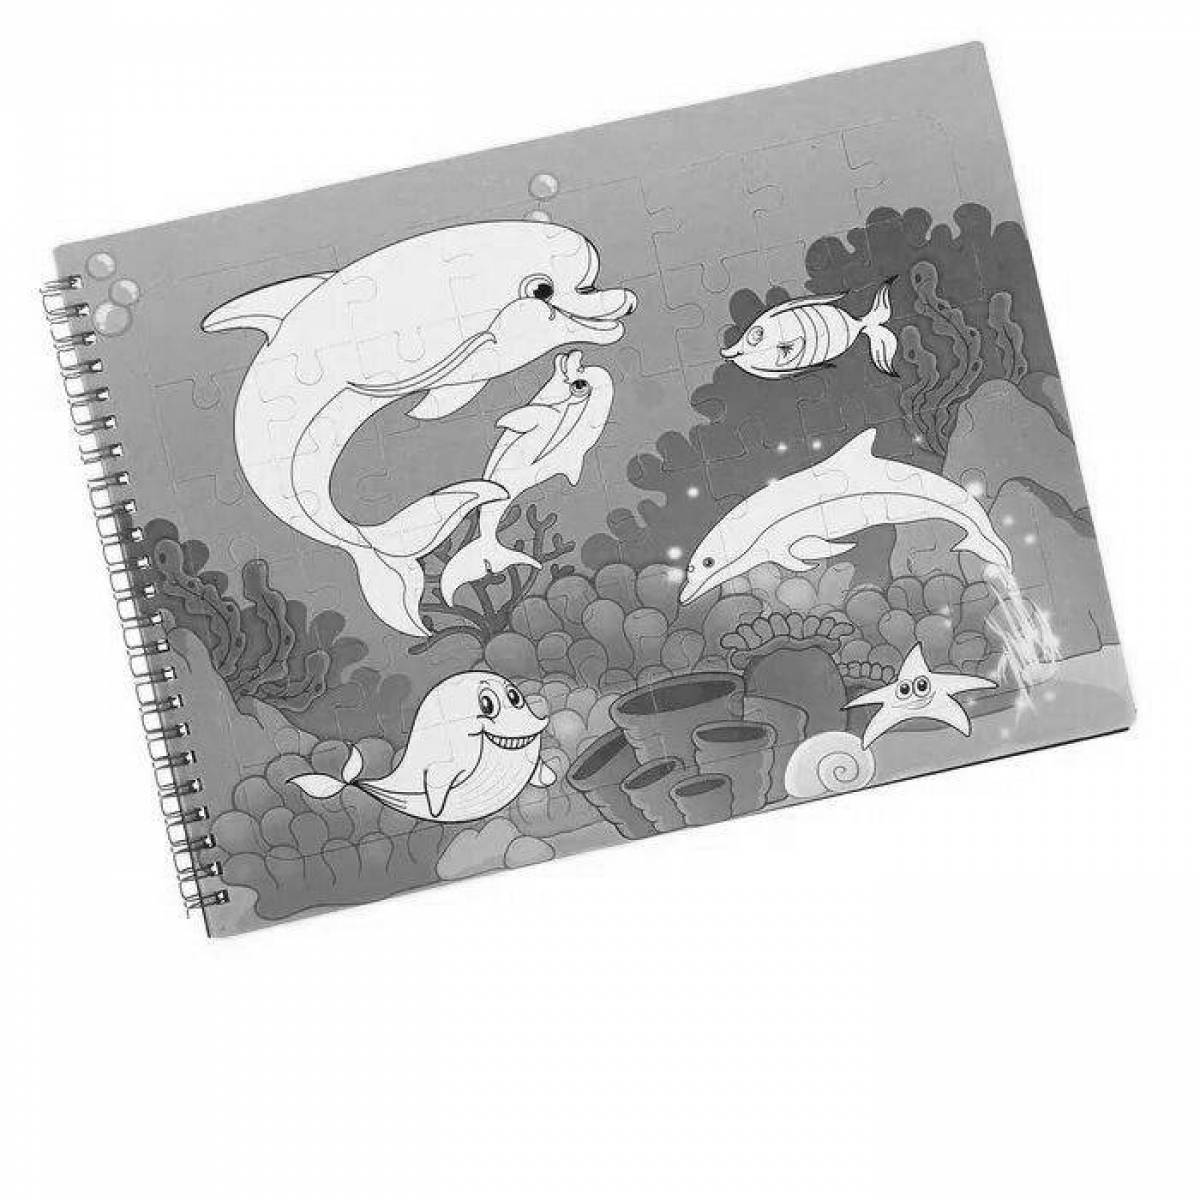 Coloring book charming engraving notebook